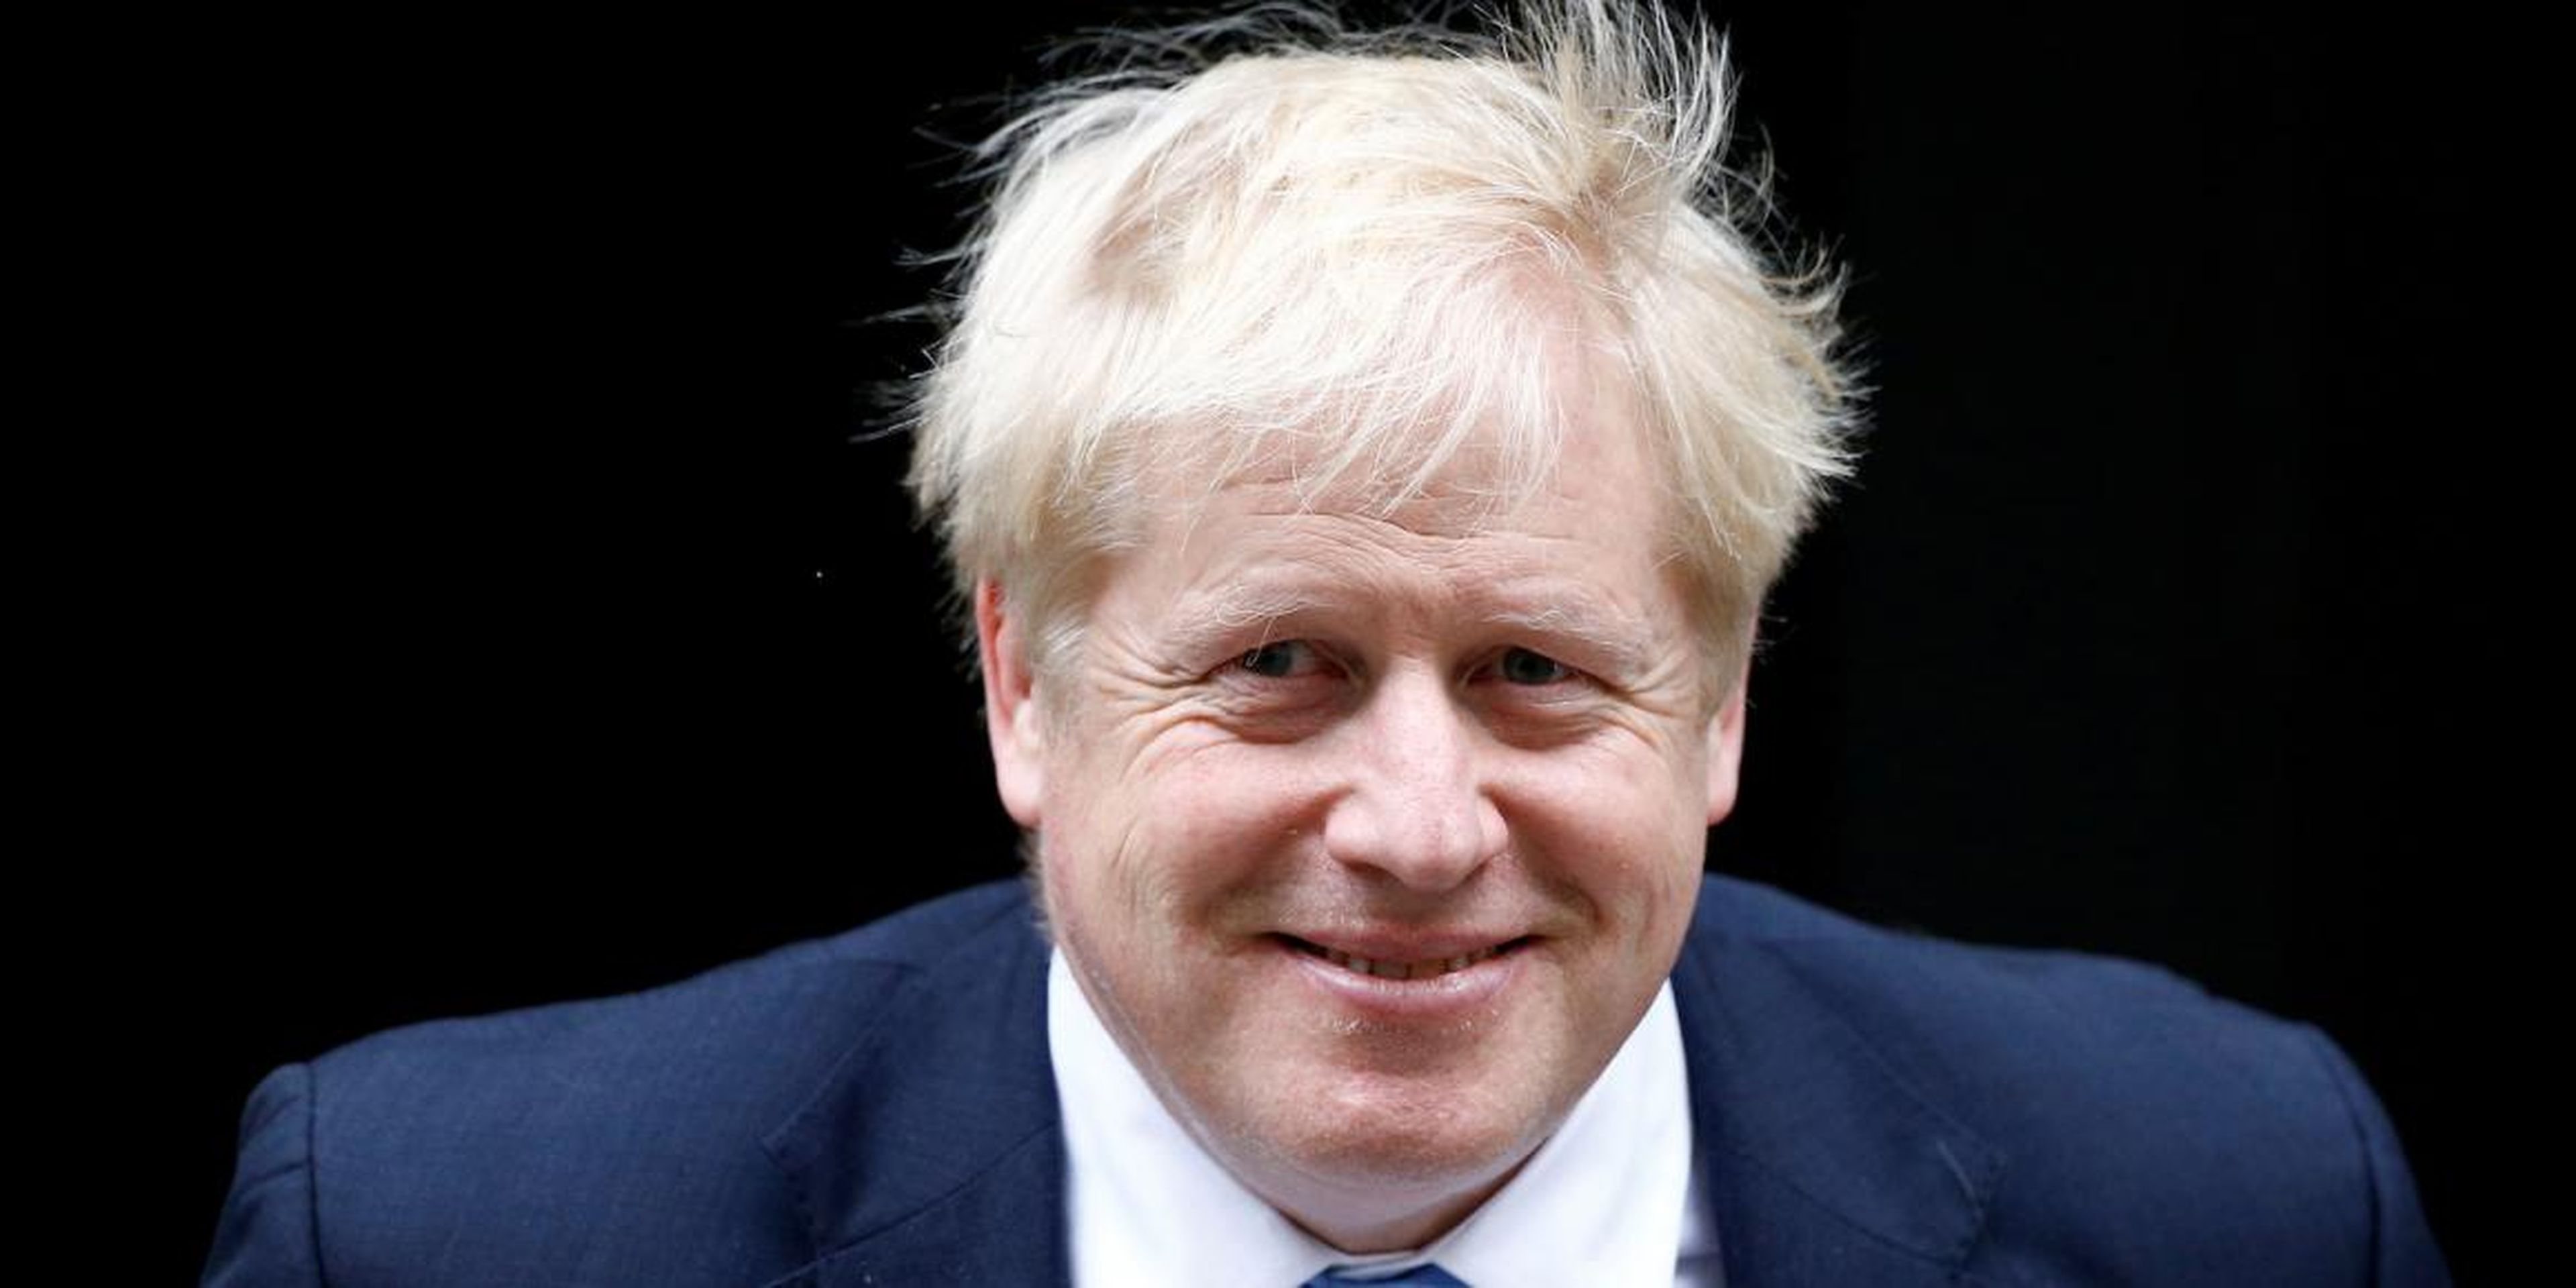 Will Boris Johnson break his promise to 'get Brexit done' by October 31?